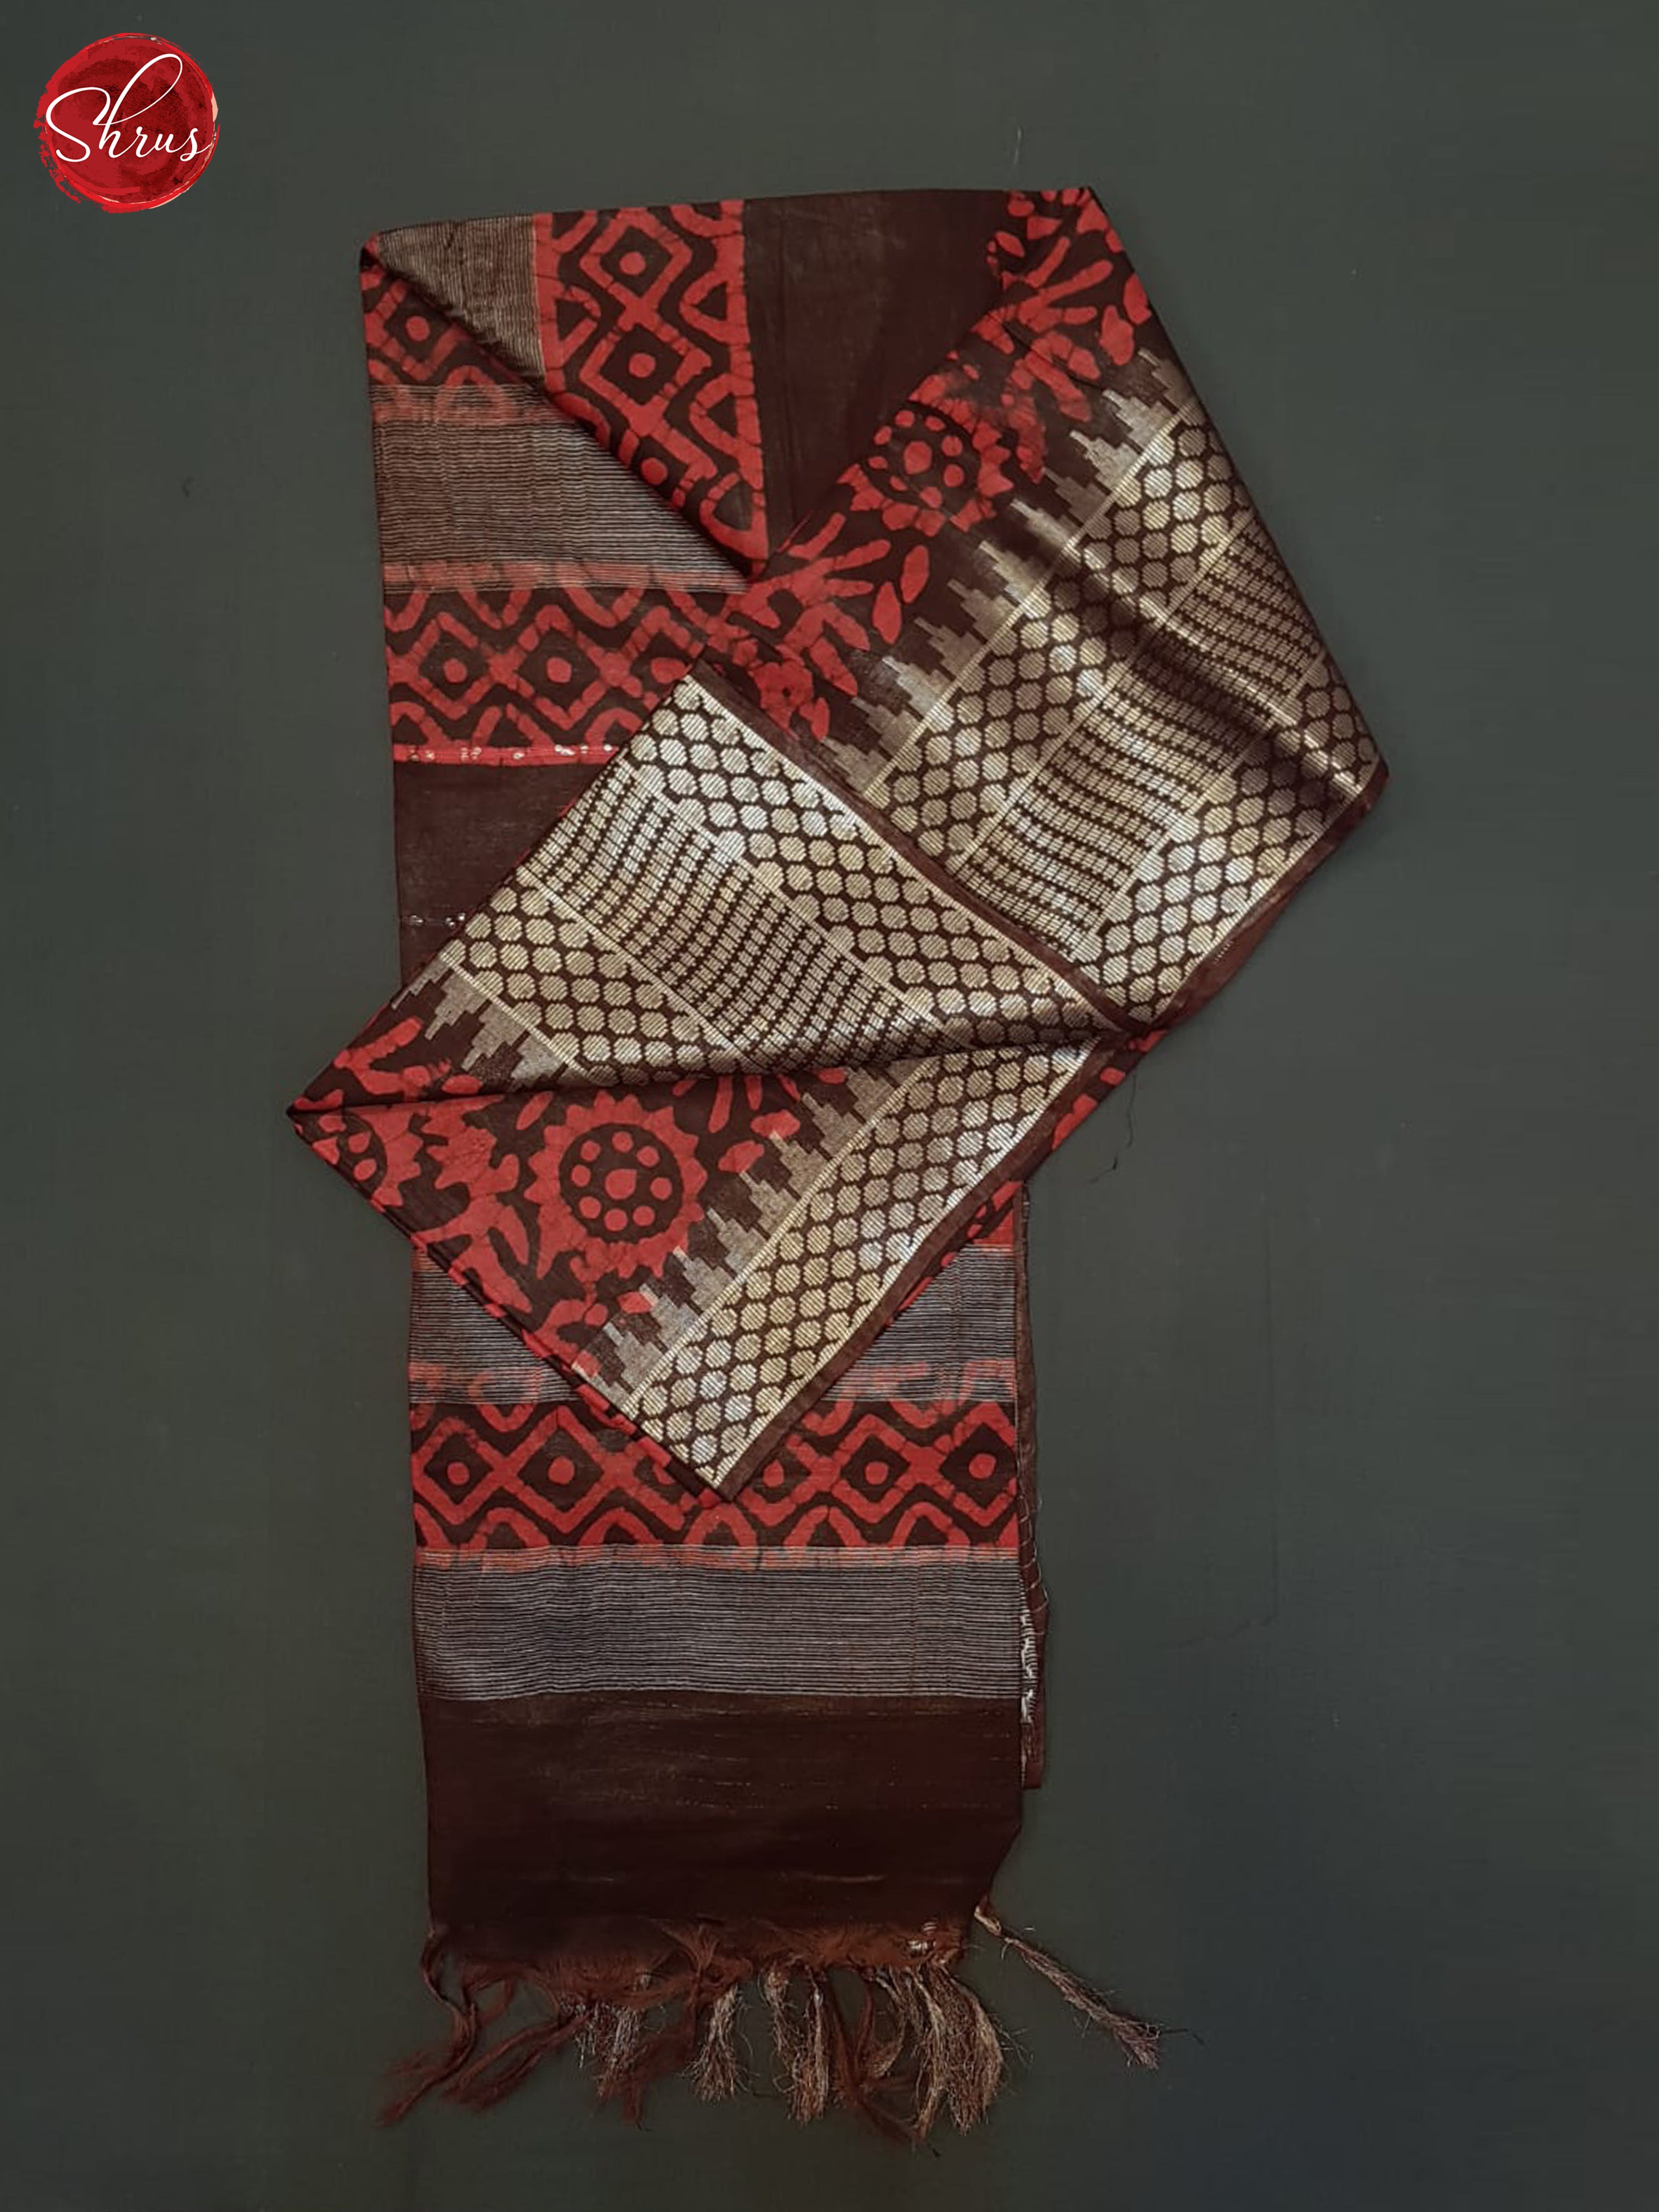 Red And Brown- Bhatik Saree - Shop on ShrusEternity.com